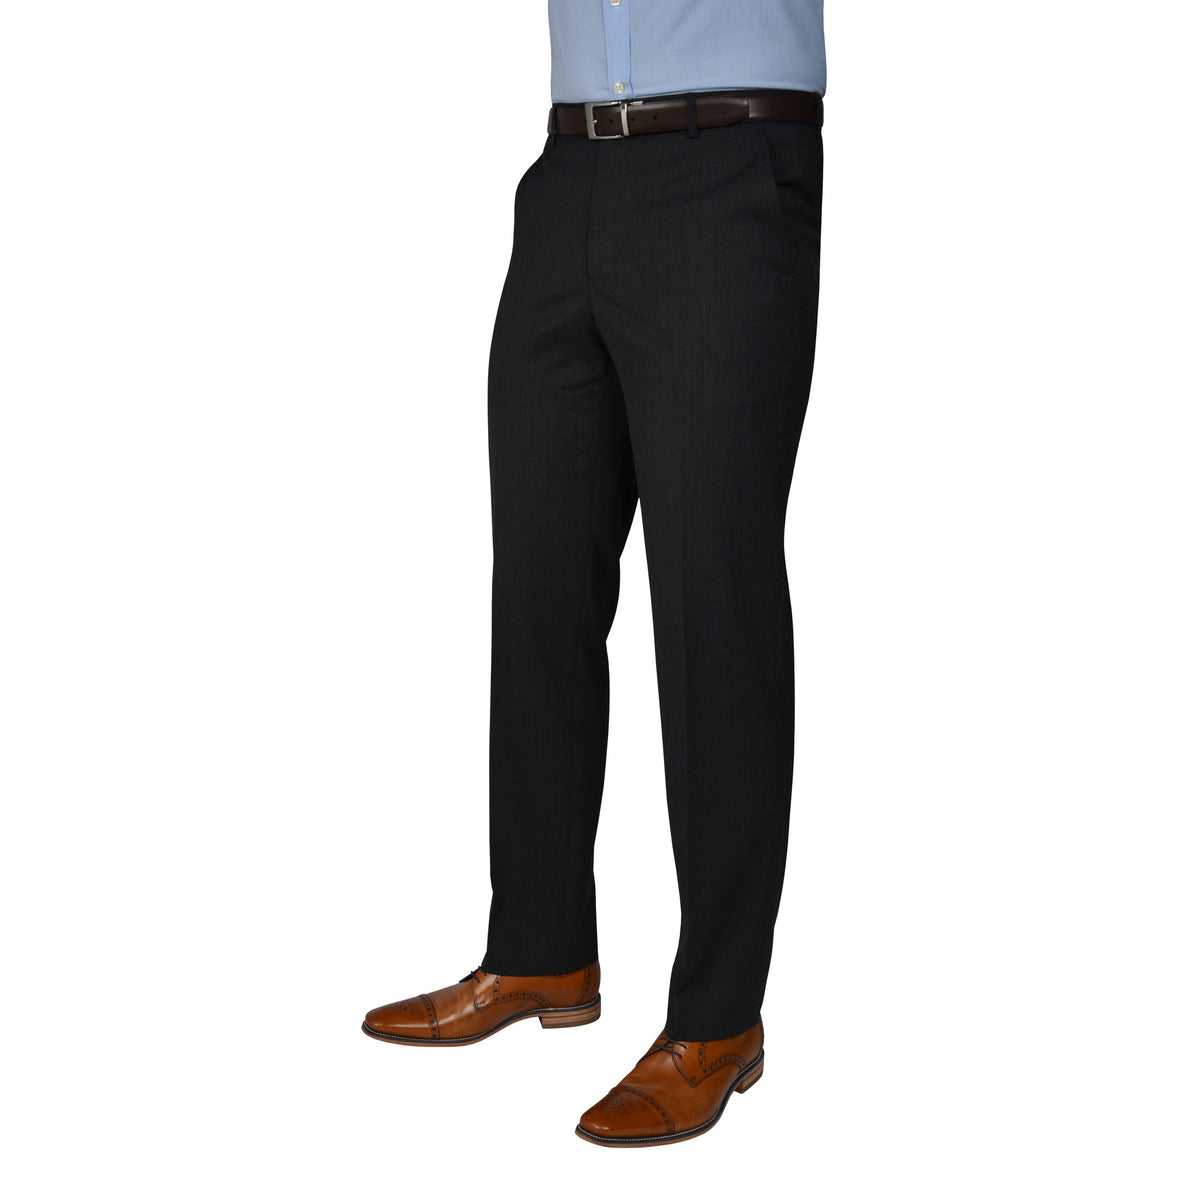 Black Label Trousers Charcoal - peterdrew.com
 - 1